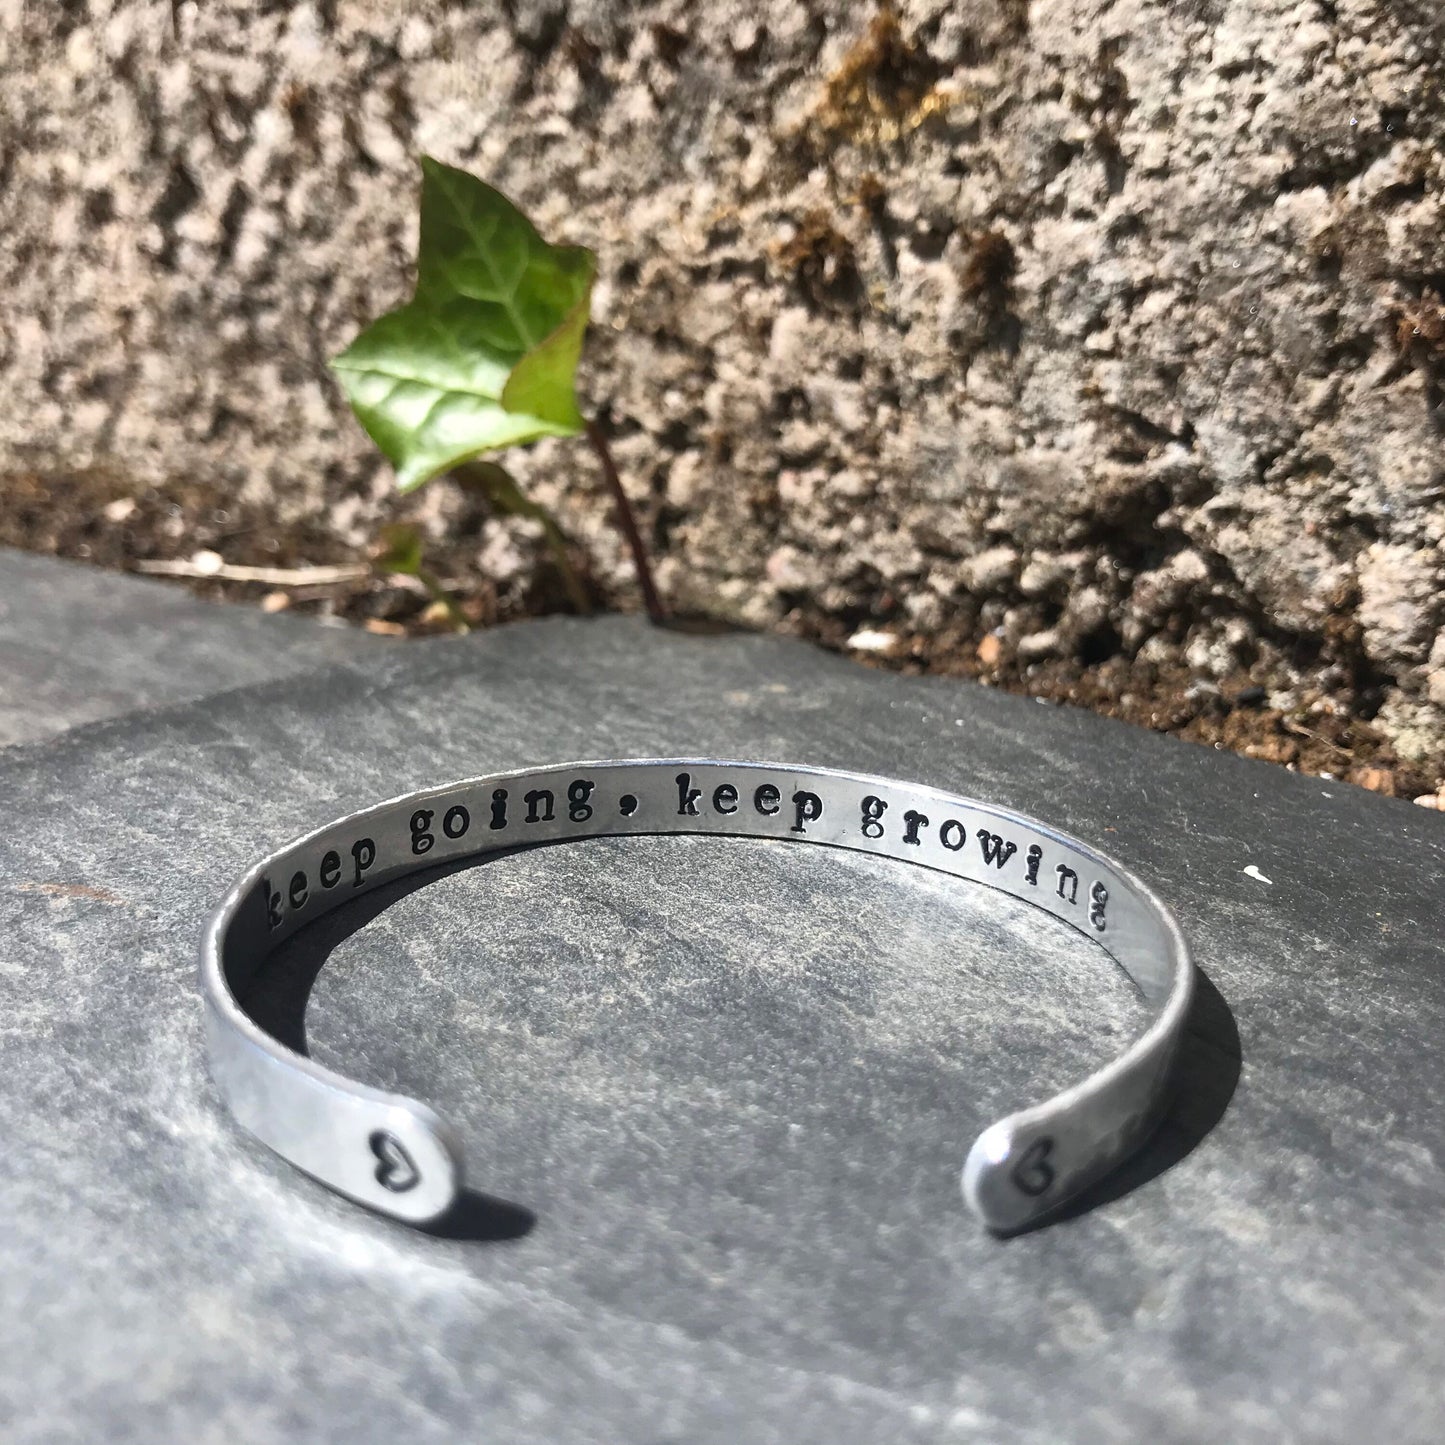 Keep Going, Keep Growing - Affirmation Band